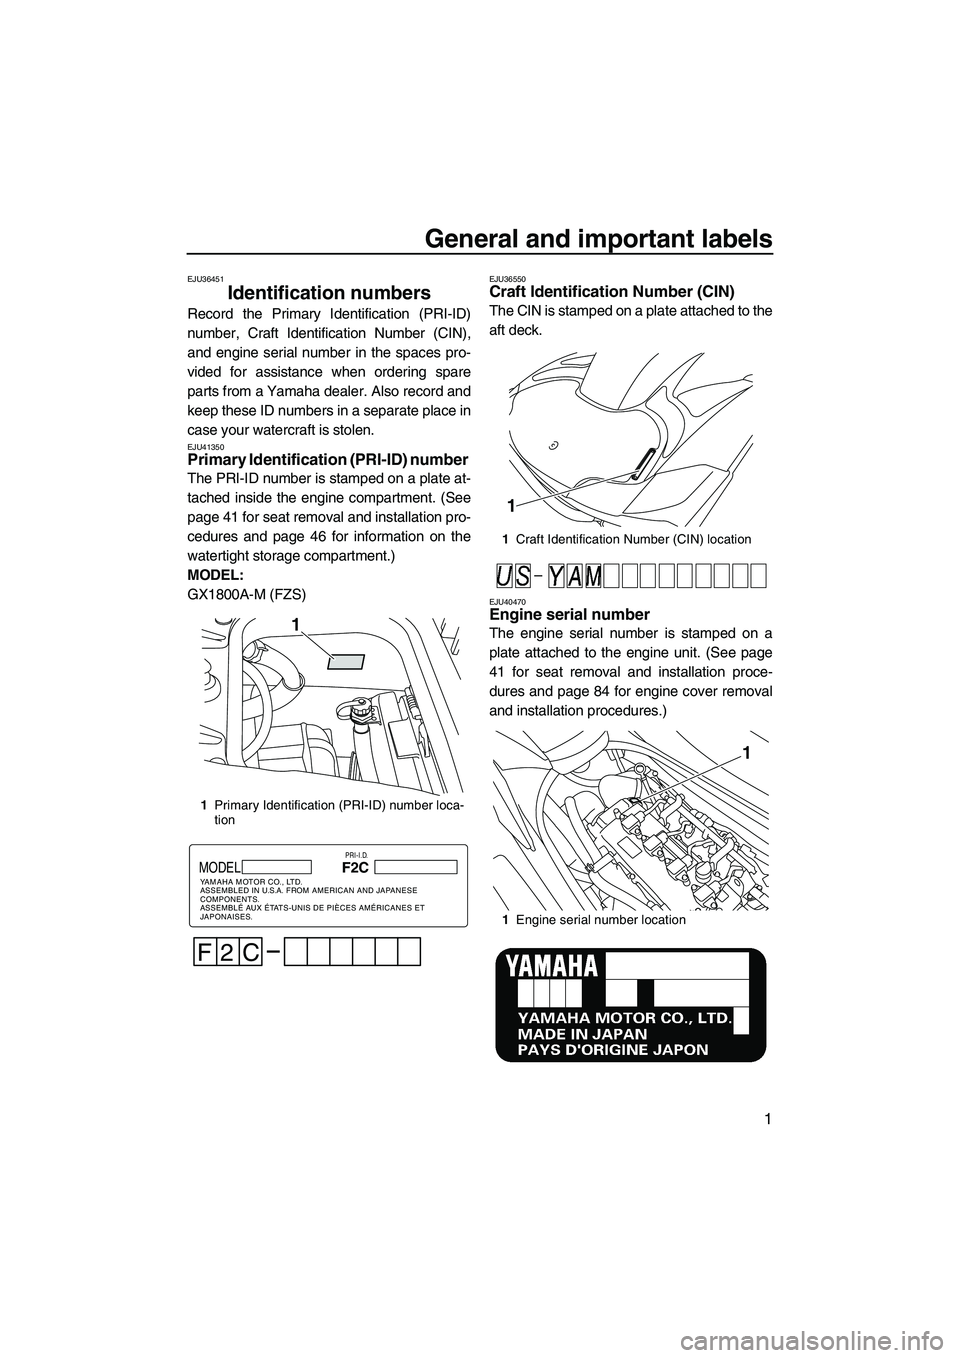 YAMAHA FZS 2013  Owners Manual General and important labels
1
EJU36451
Identification numbers 
Record the Primary Identification (PRI-ID)
number, Craft Identification Number (CIN),
and engine serial number in the spaces pro-
vided 